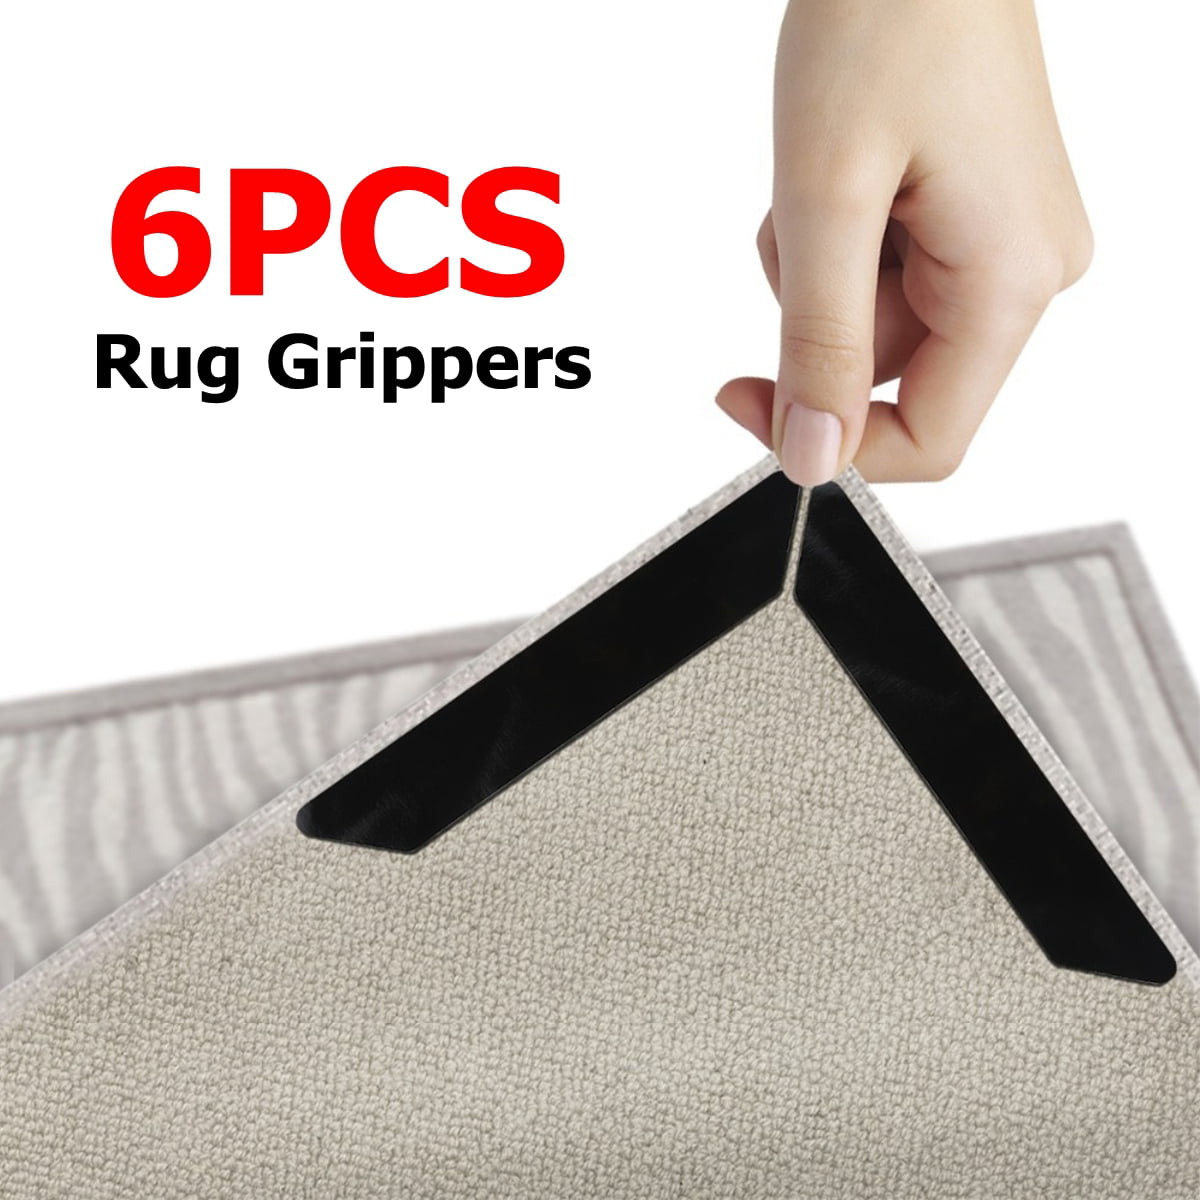 8 RUG GRIPPERS CARPET MAT RUGGIES NON SLIP SKID REUSABLE WASHABLE As Seen On TV 